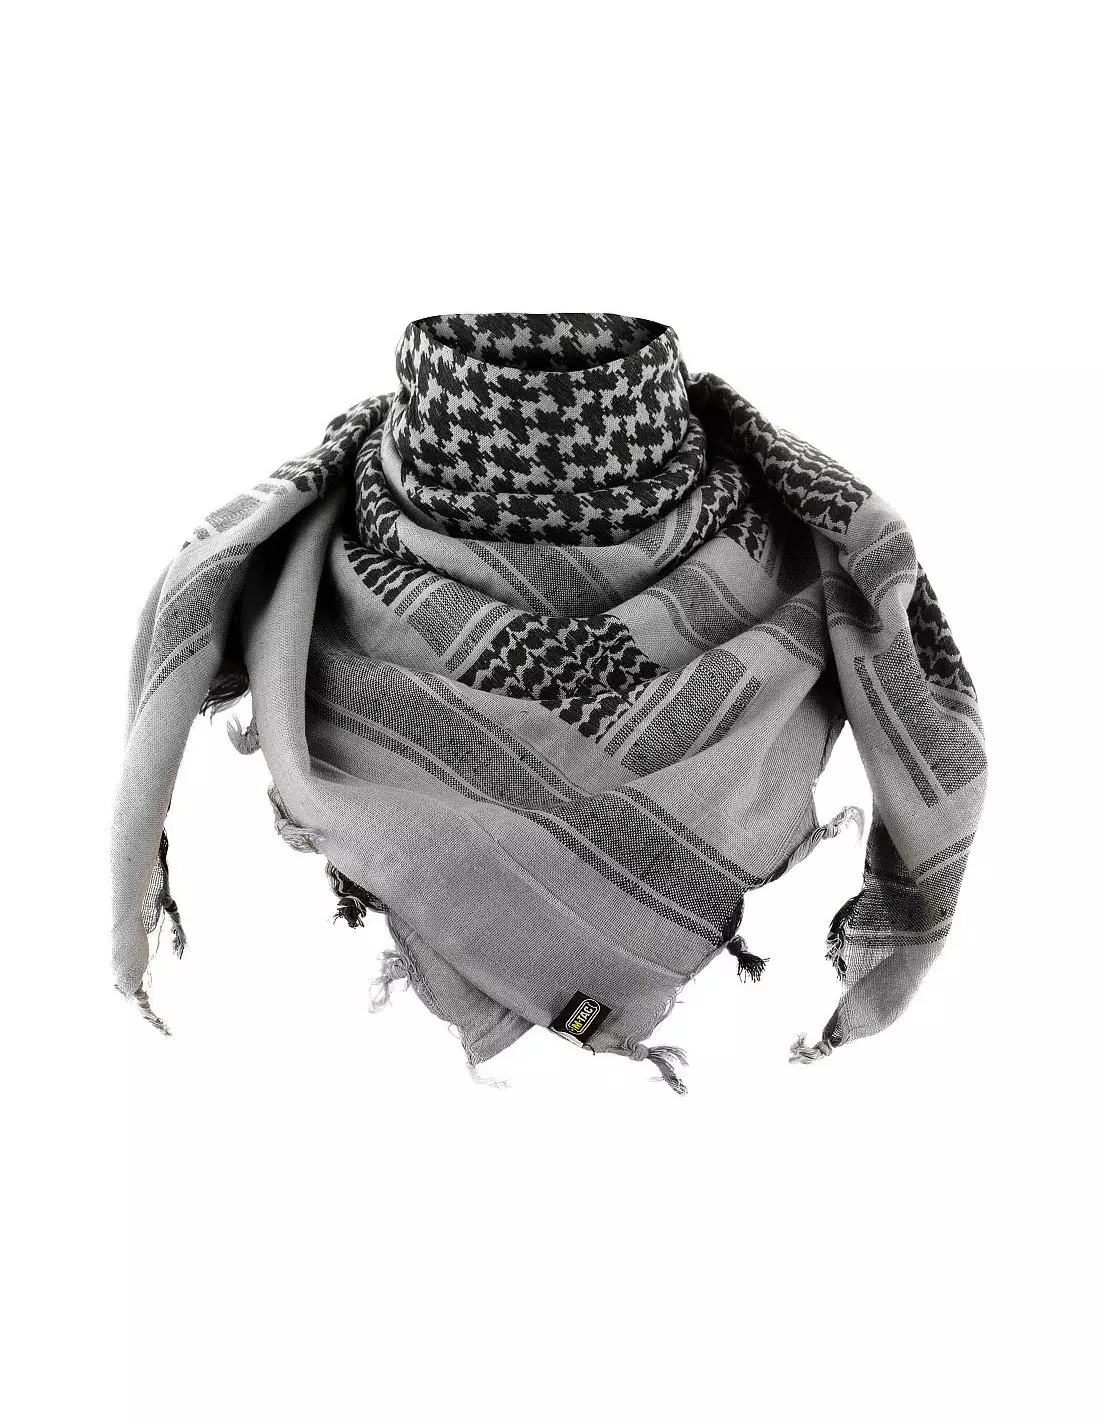 M-Tac® Shemagh Protective Scarf - Grey/Black